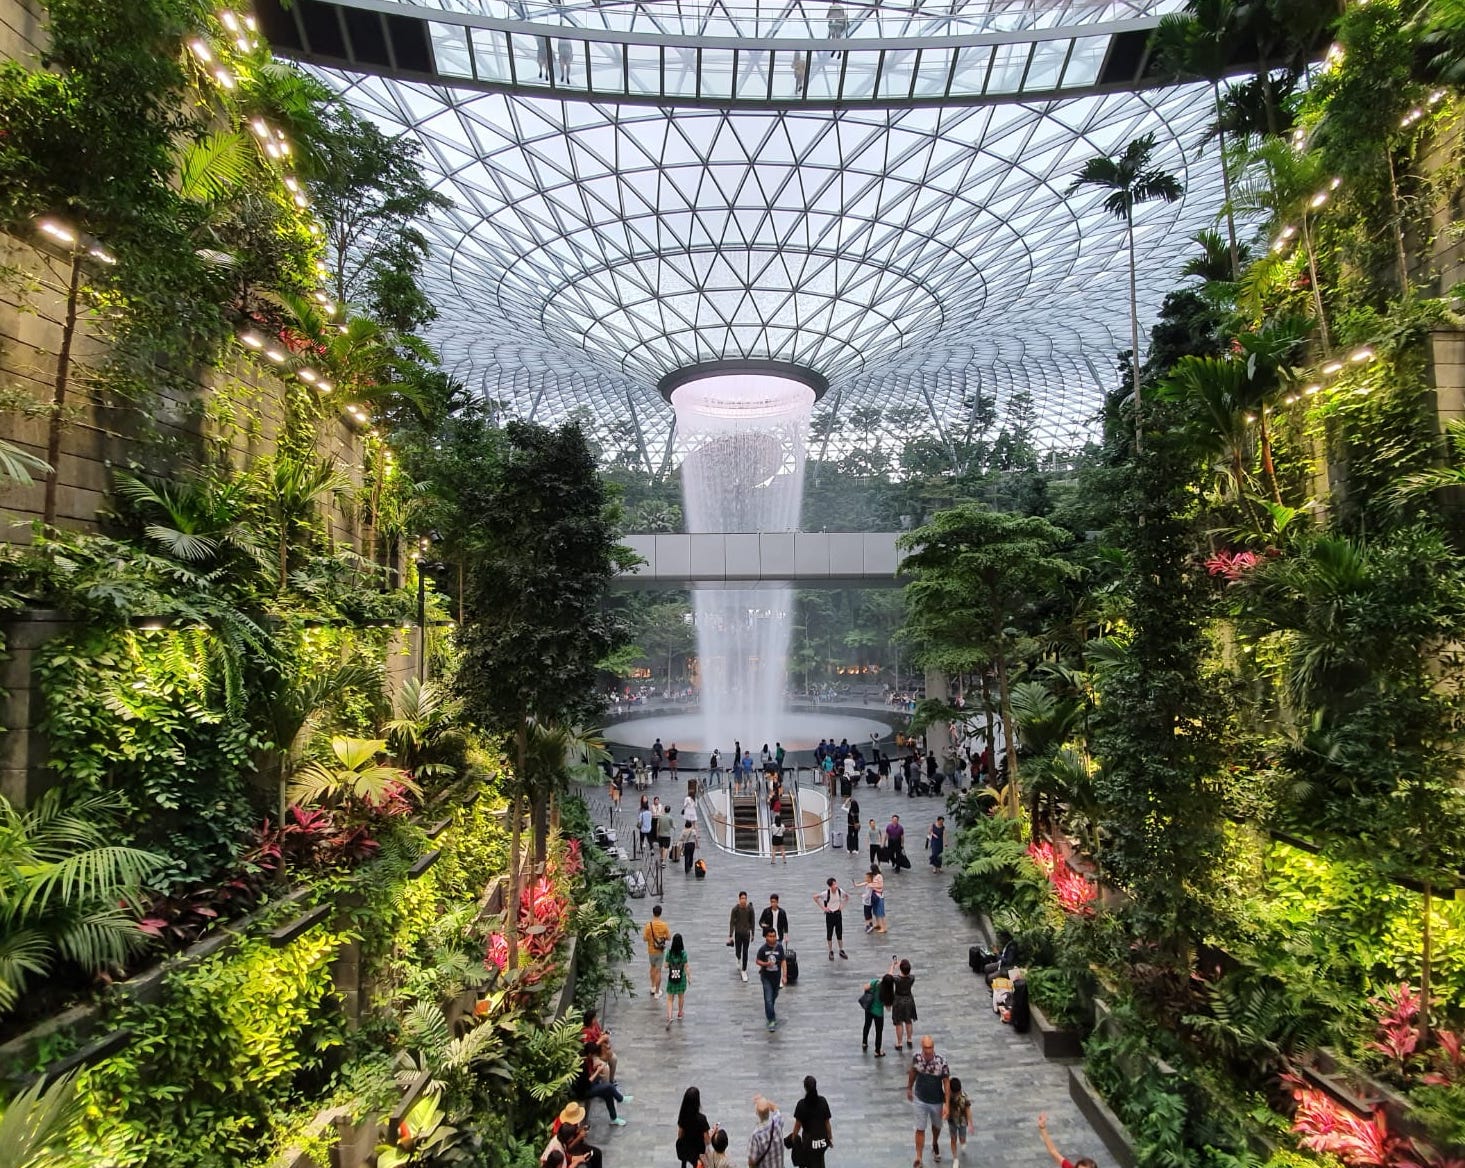 If Only Singaporeans Stopped to Think: Changi's T1 carpark closing to make  way for Jewel